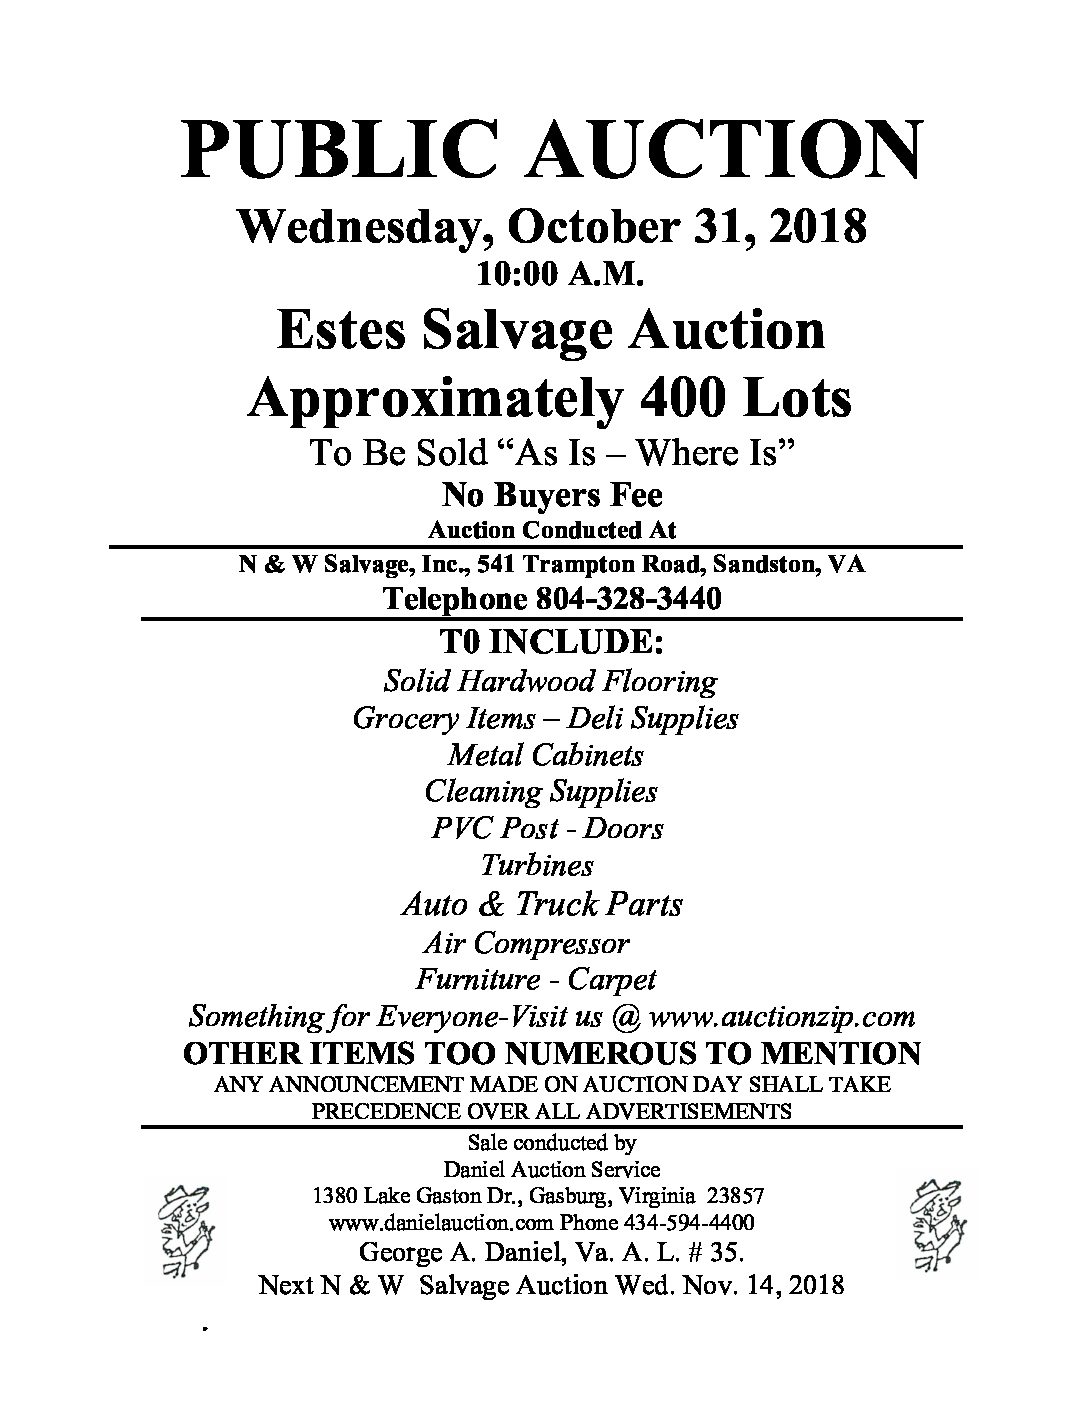 Wed Oct 31, 2018 Estes Salvage Auction